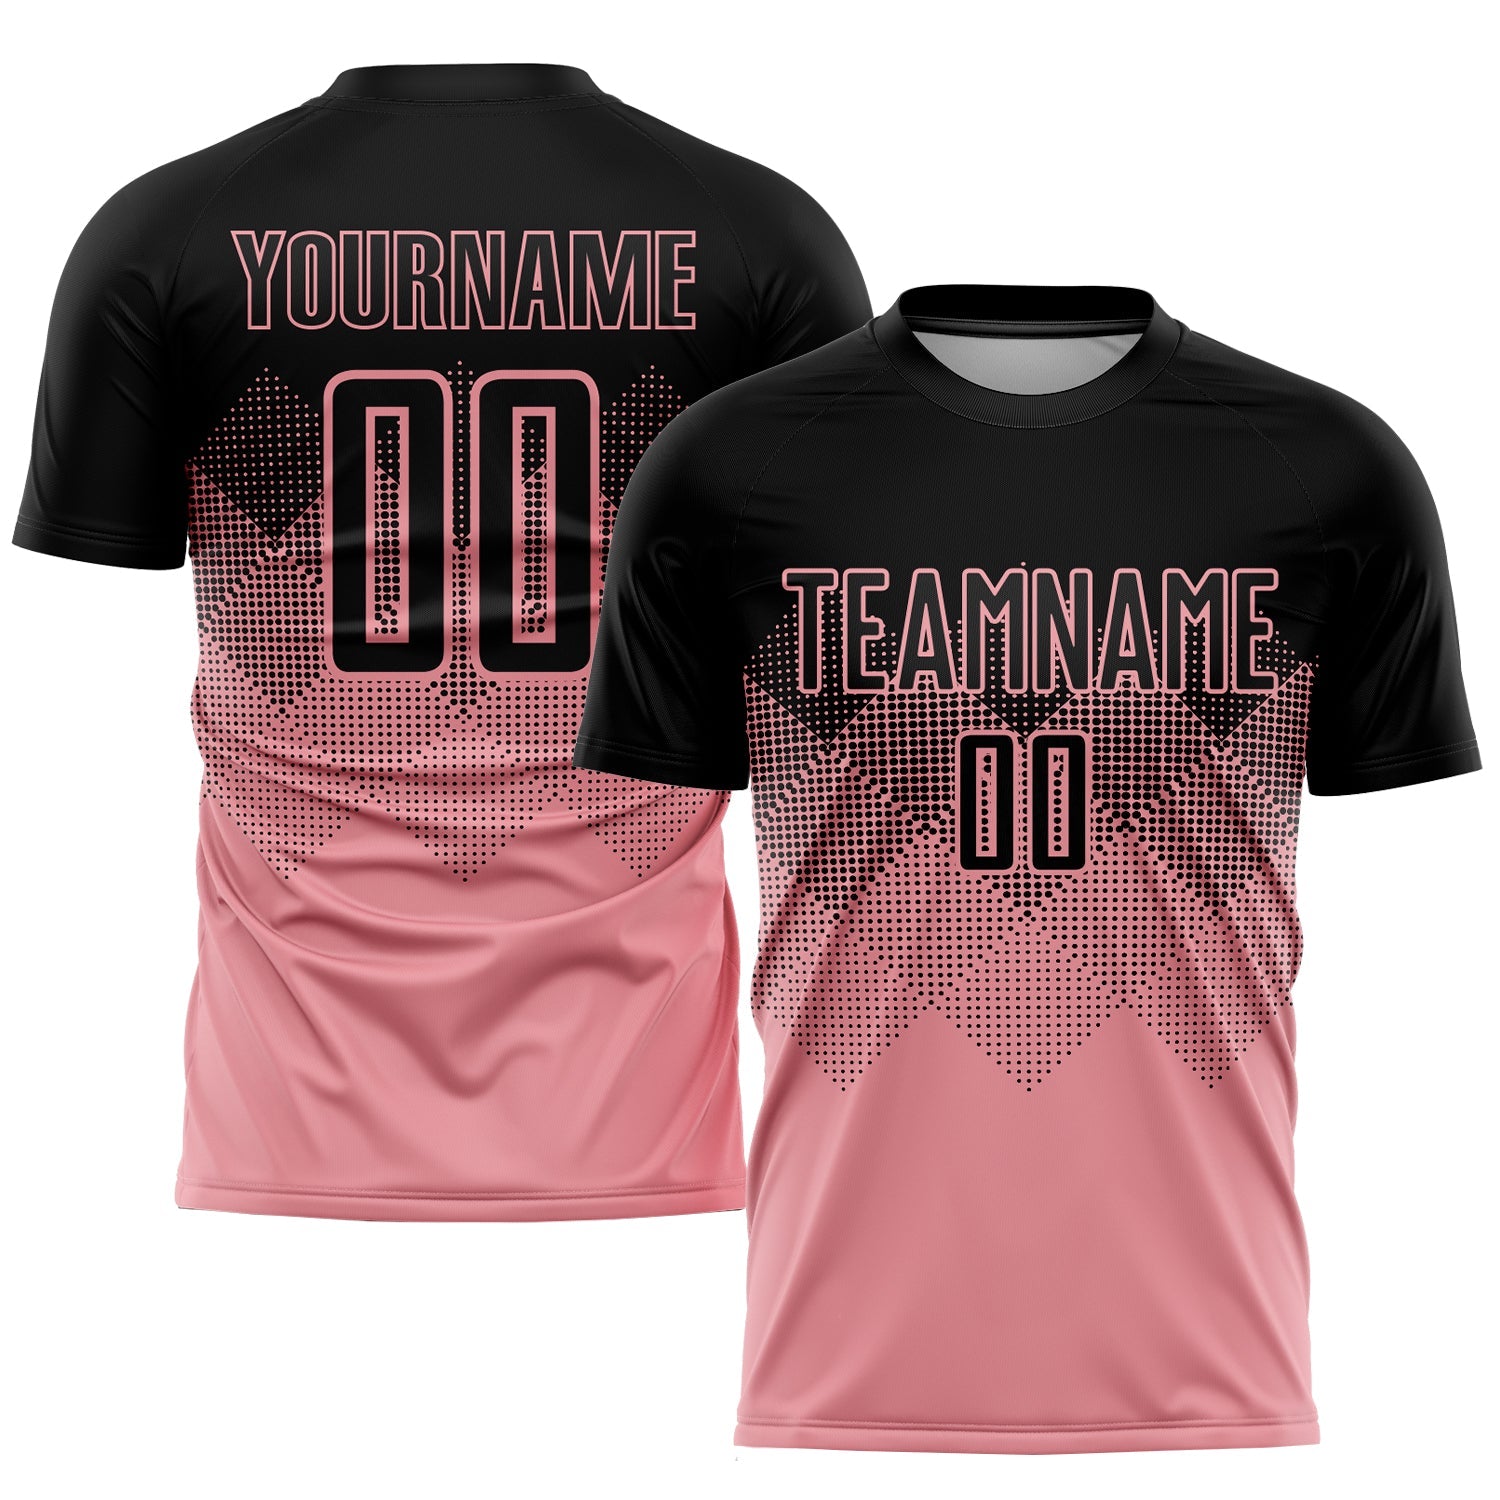 Classic 19 - Customized Men's Sublimated Soccer Jersey Design